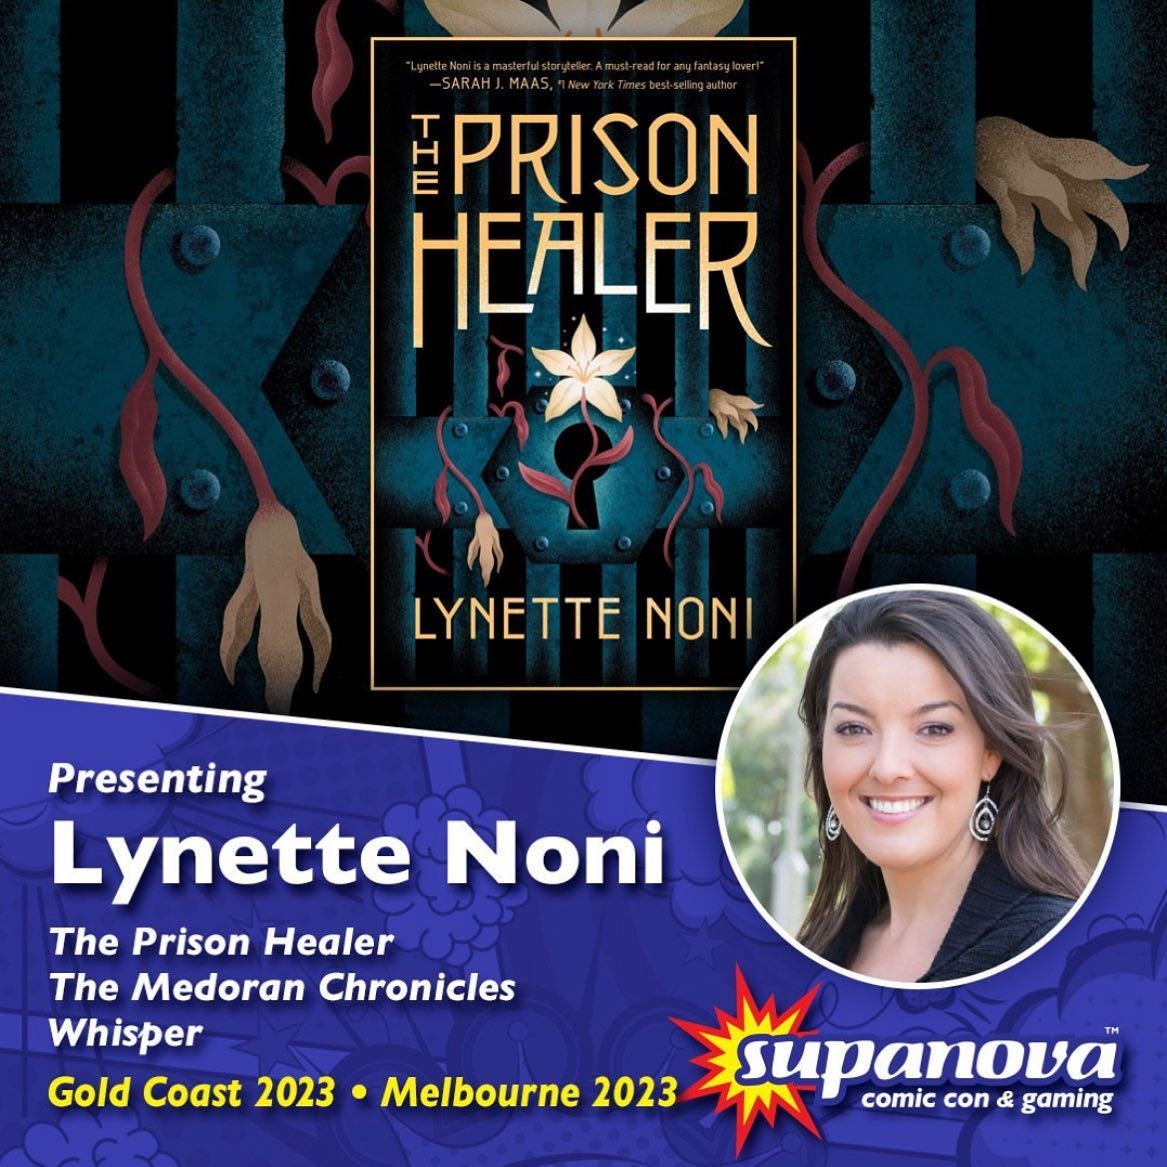 May be an image of 1 person and text that says 'EPRISON HEALER LYNETTE NONI Presenting Lynette Noni The Prison Healer The Medoran Chronicles Whisper Gold Coast 2023 Melbourne 2023 supanova comic con & gaming'